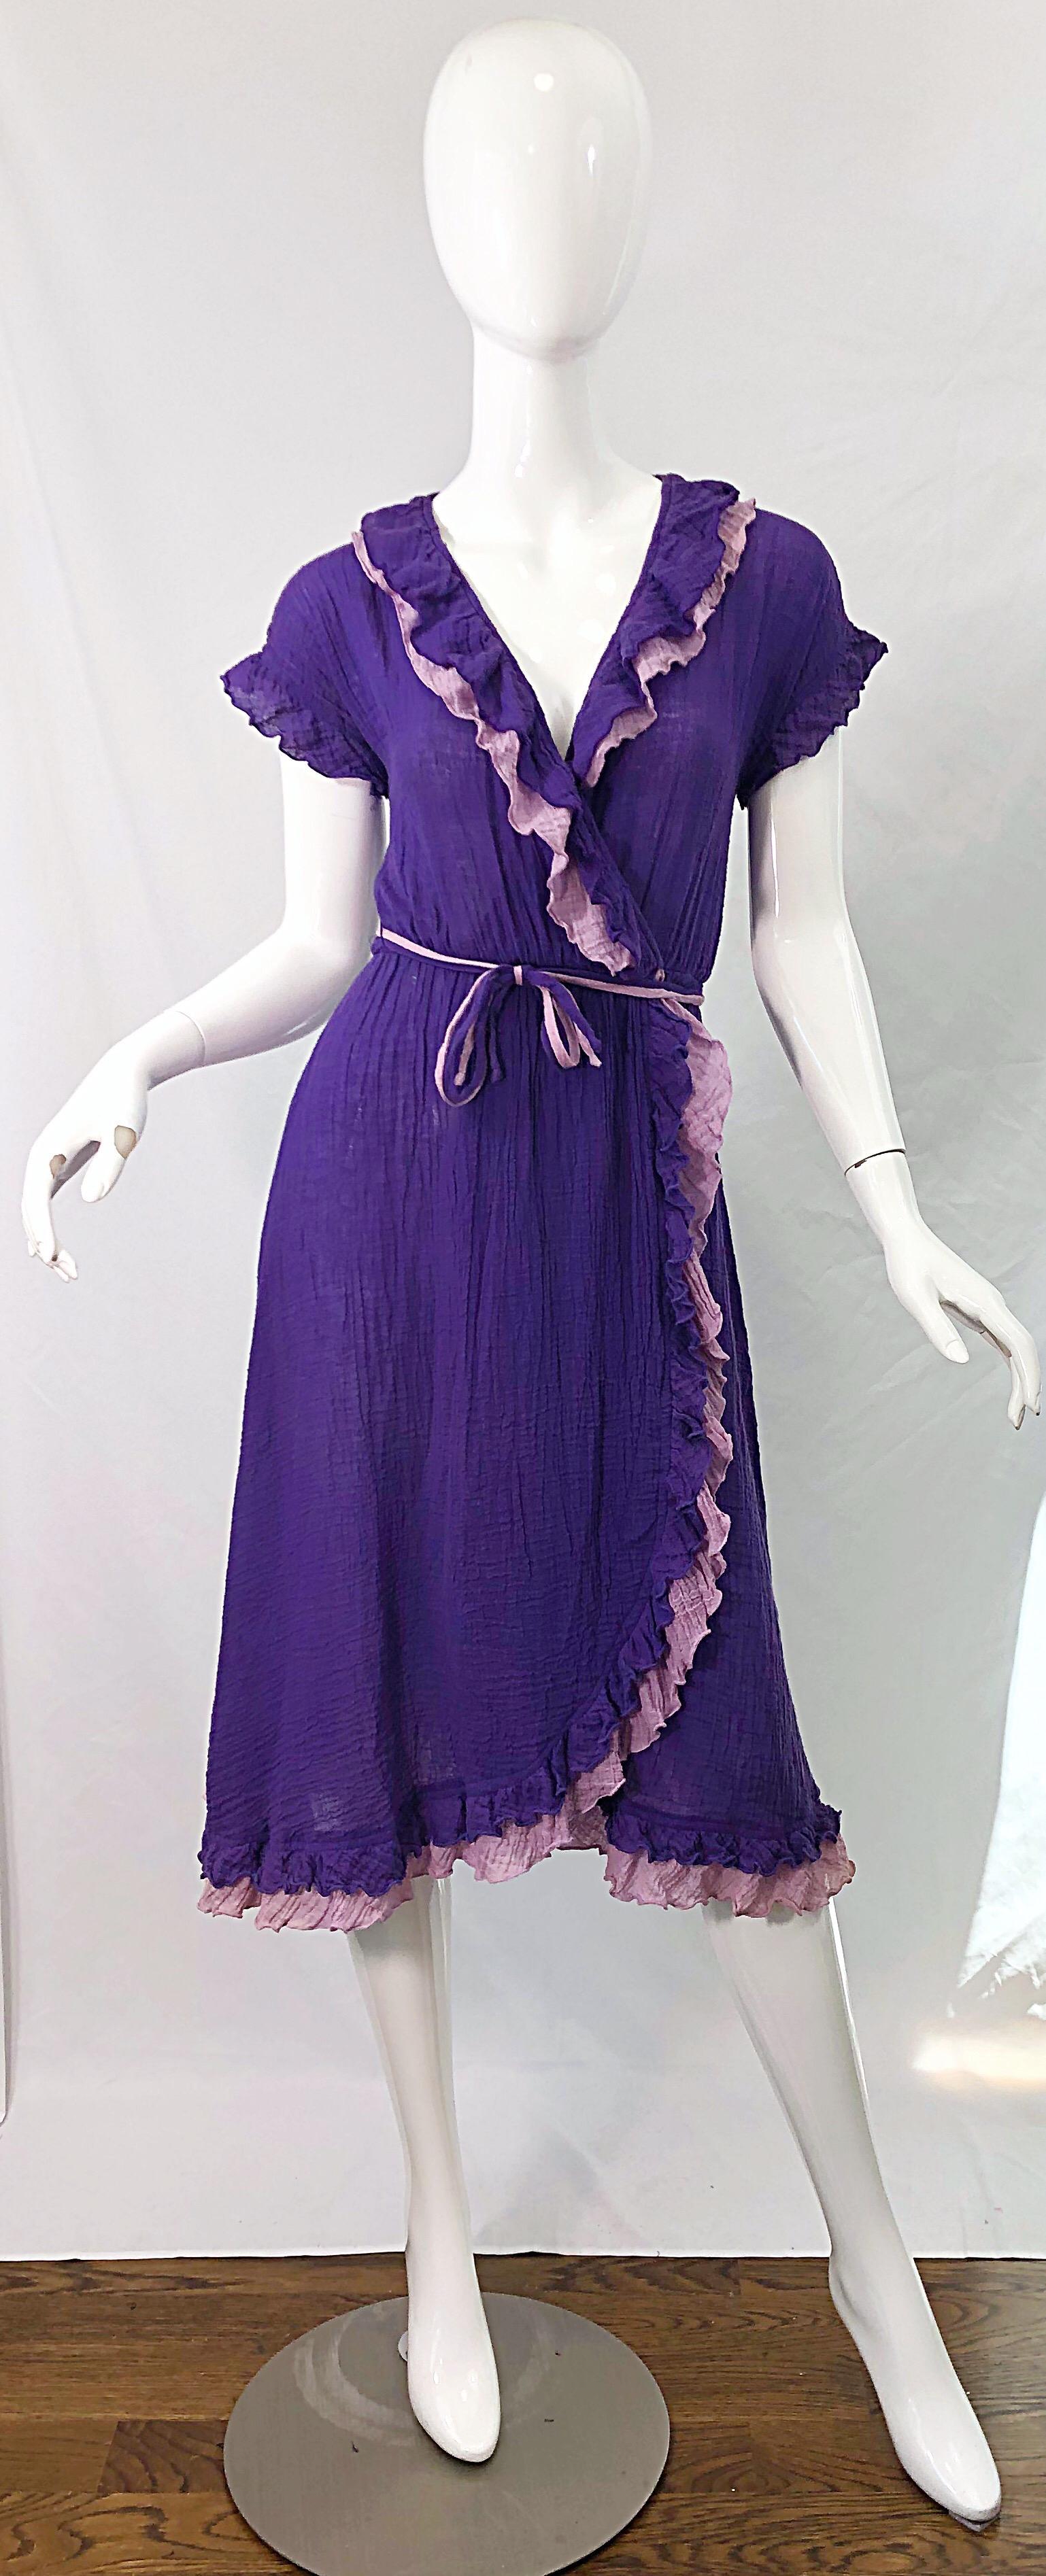 Amazing 1970s purple and lavender lightweight cotton voile short sleeve wrap dress ! Features a vibrant regal purple with lavender ruffle details. Elastic waistband. Both colors on each of the belts. Light and breezy perfect for any time of year.